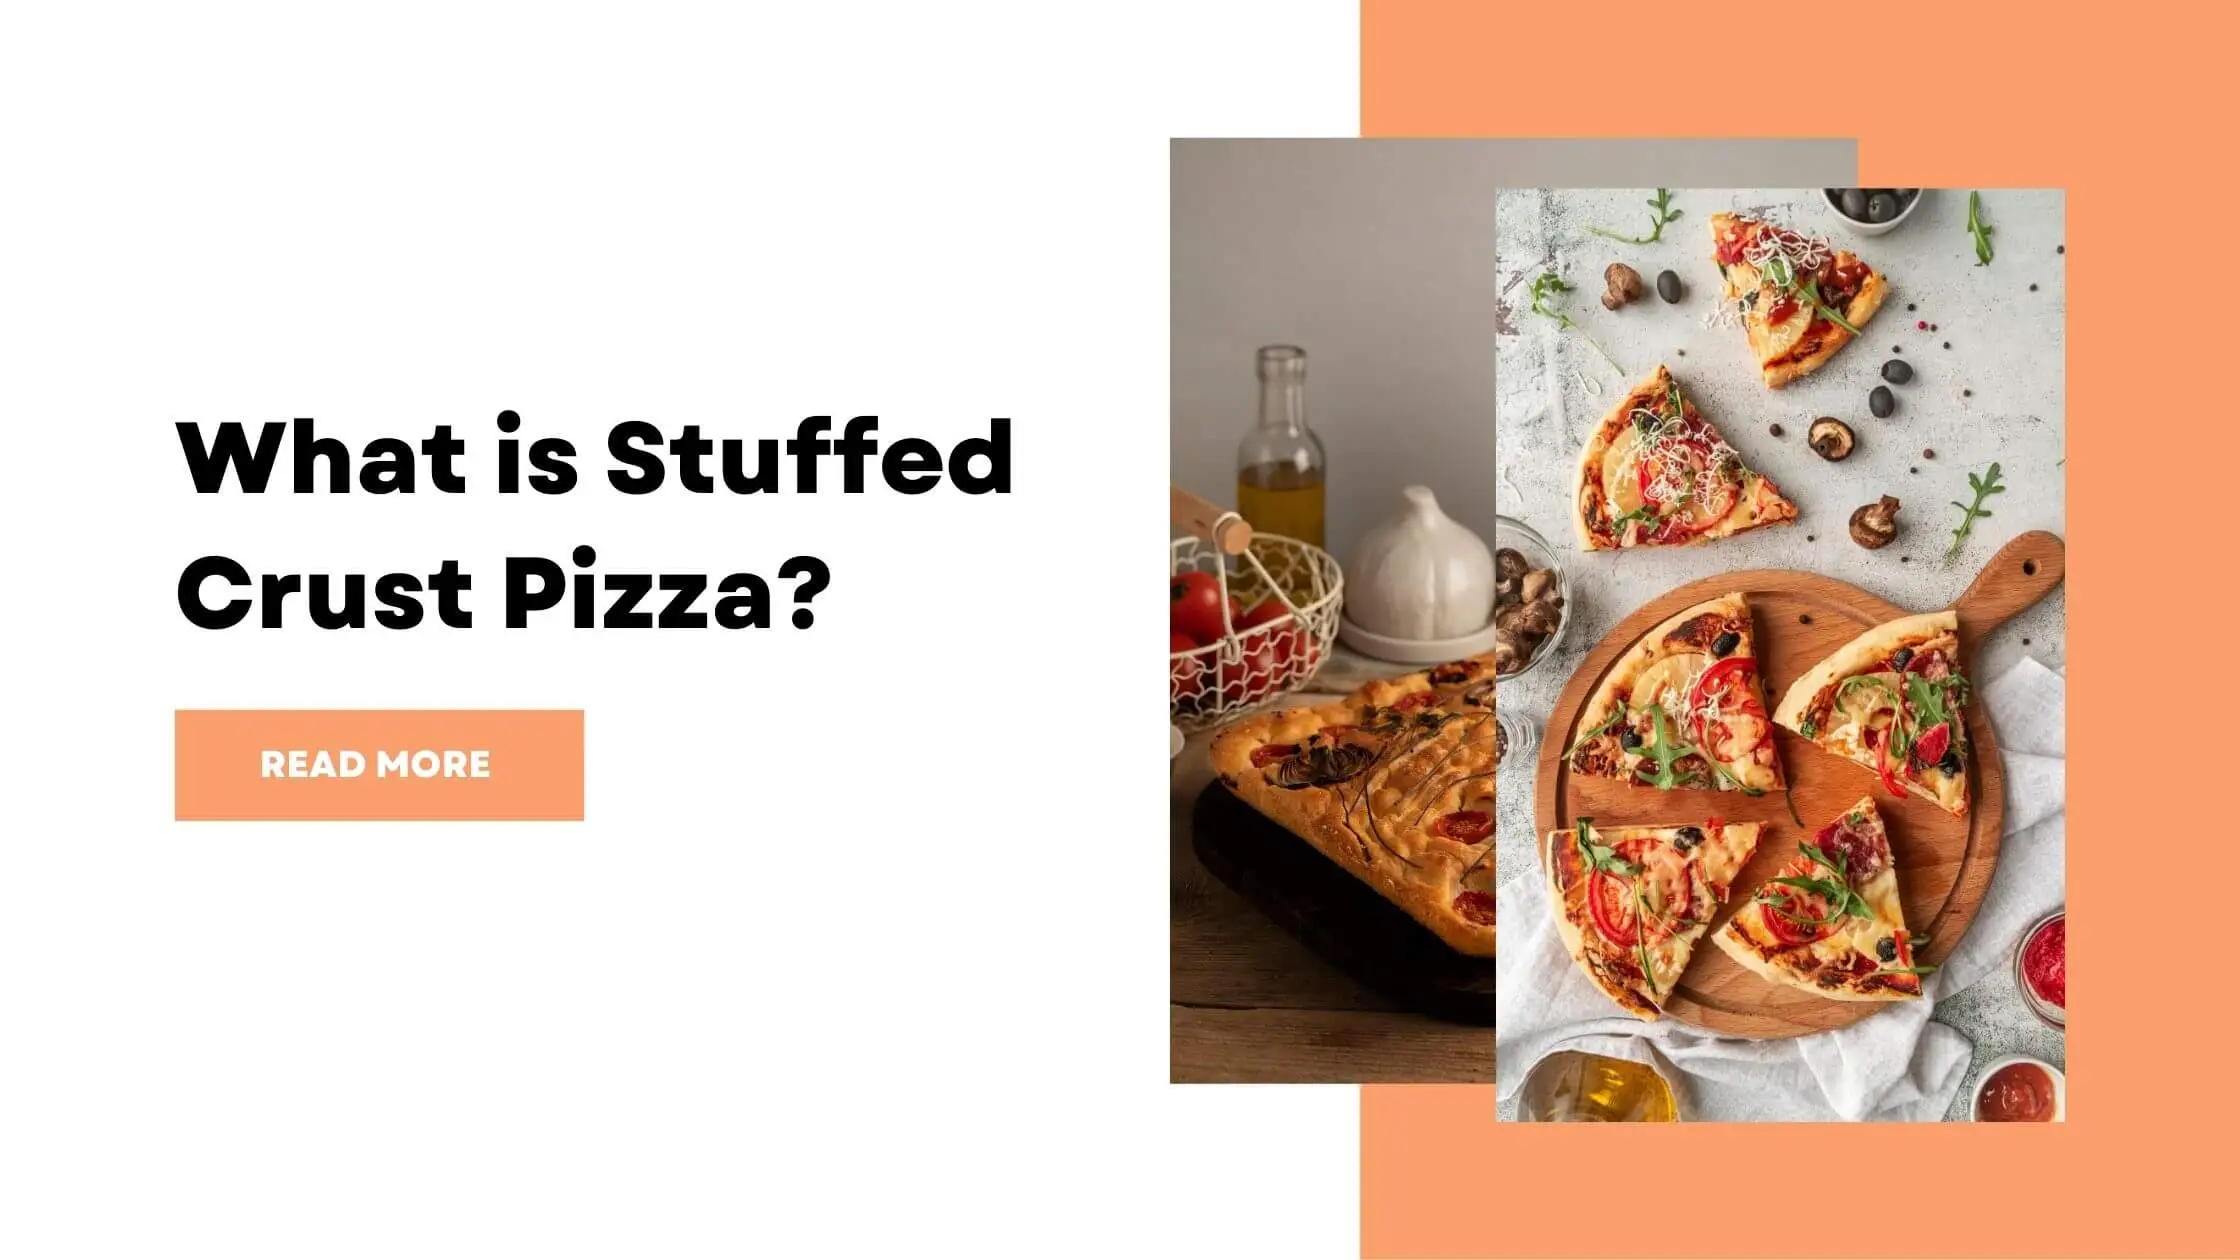 Find Out for Yourself: Does Domino’s have Stuffed Crust Pizza?